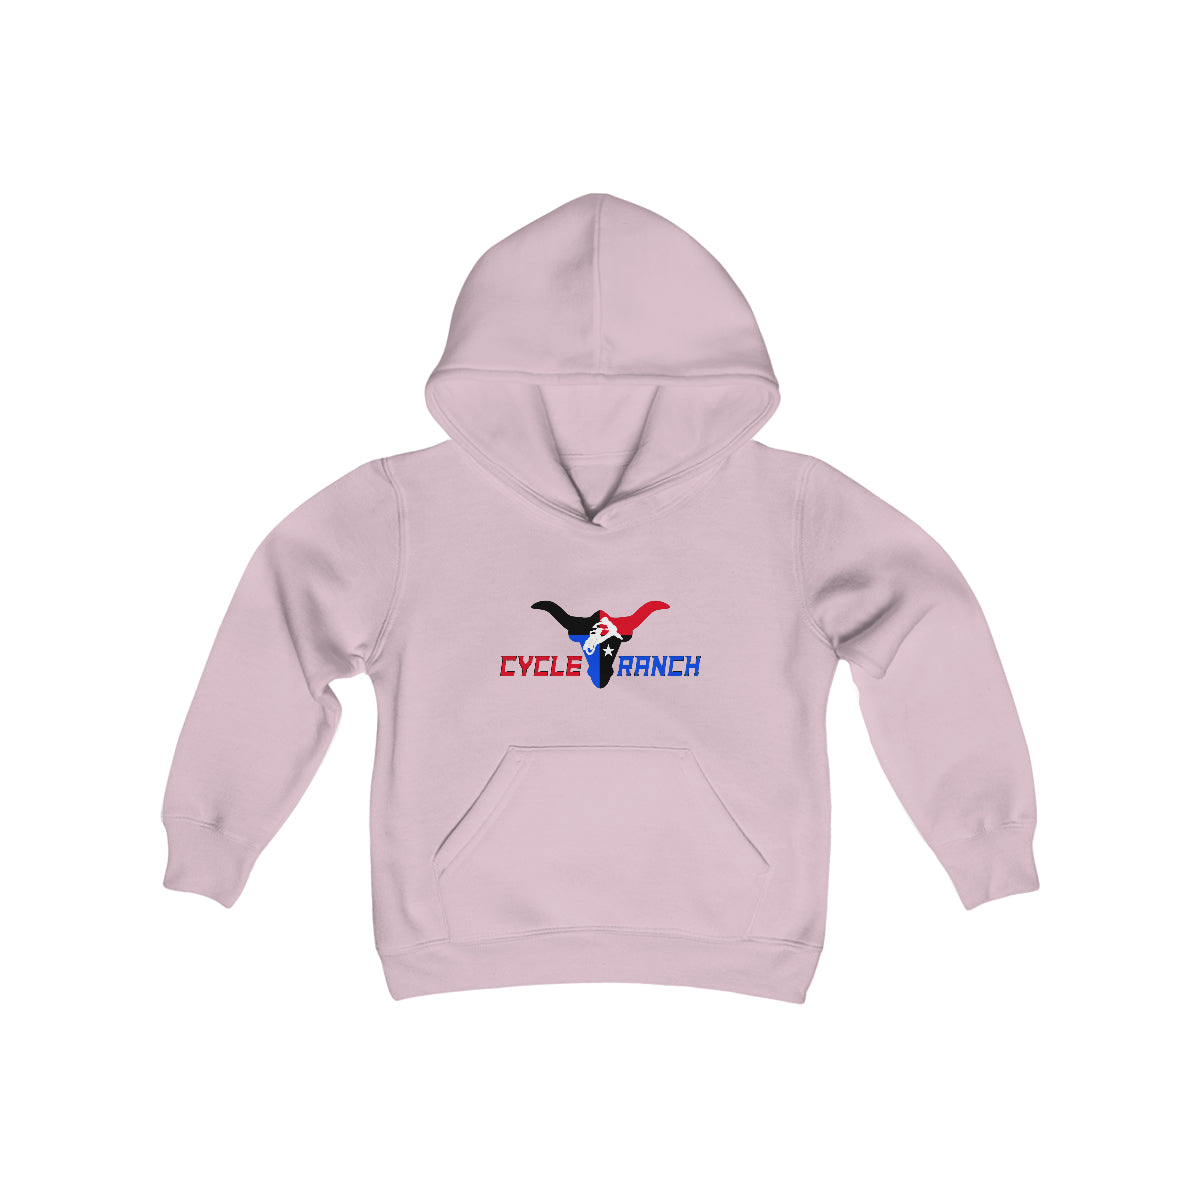 CYCLE RANCH YOUTH HOODIE - HEAVY BLEND